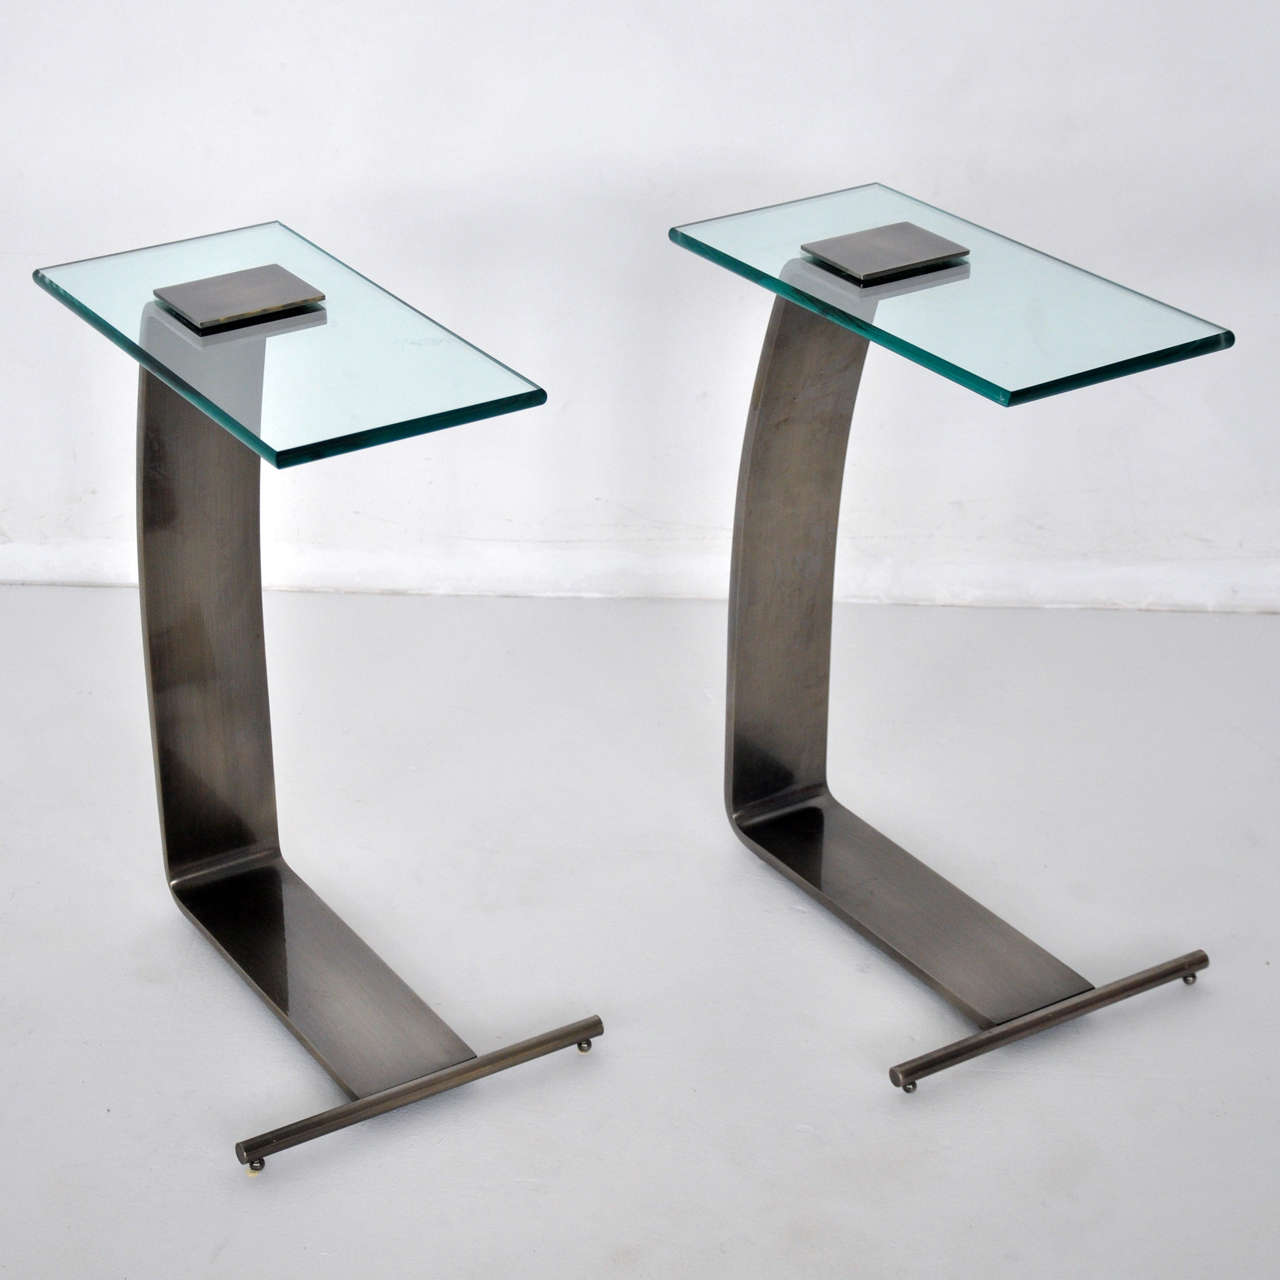 Pair of Design Institute America side tables. Gunmetal frames with cantilever glass.